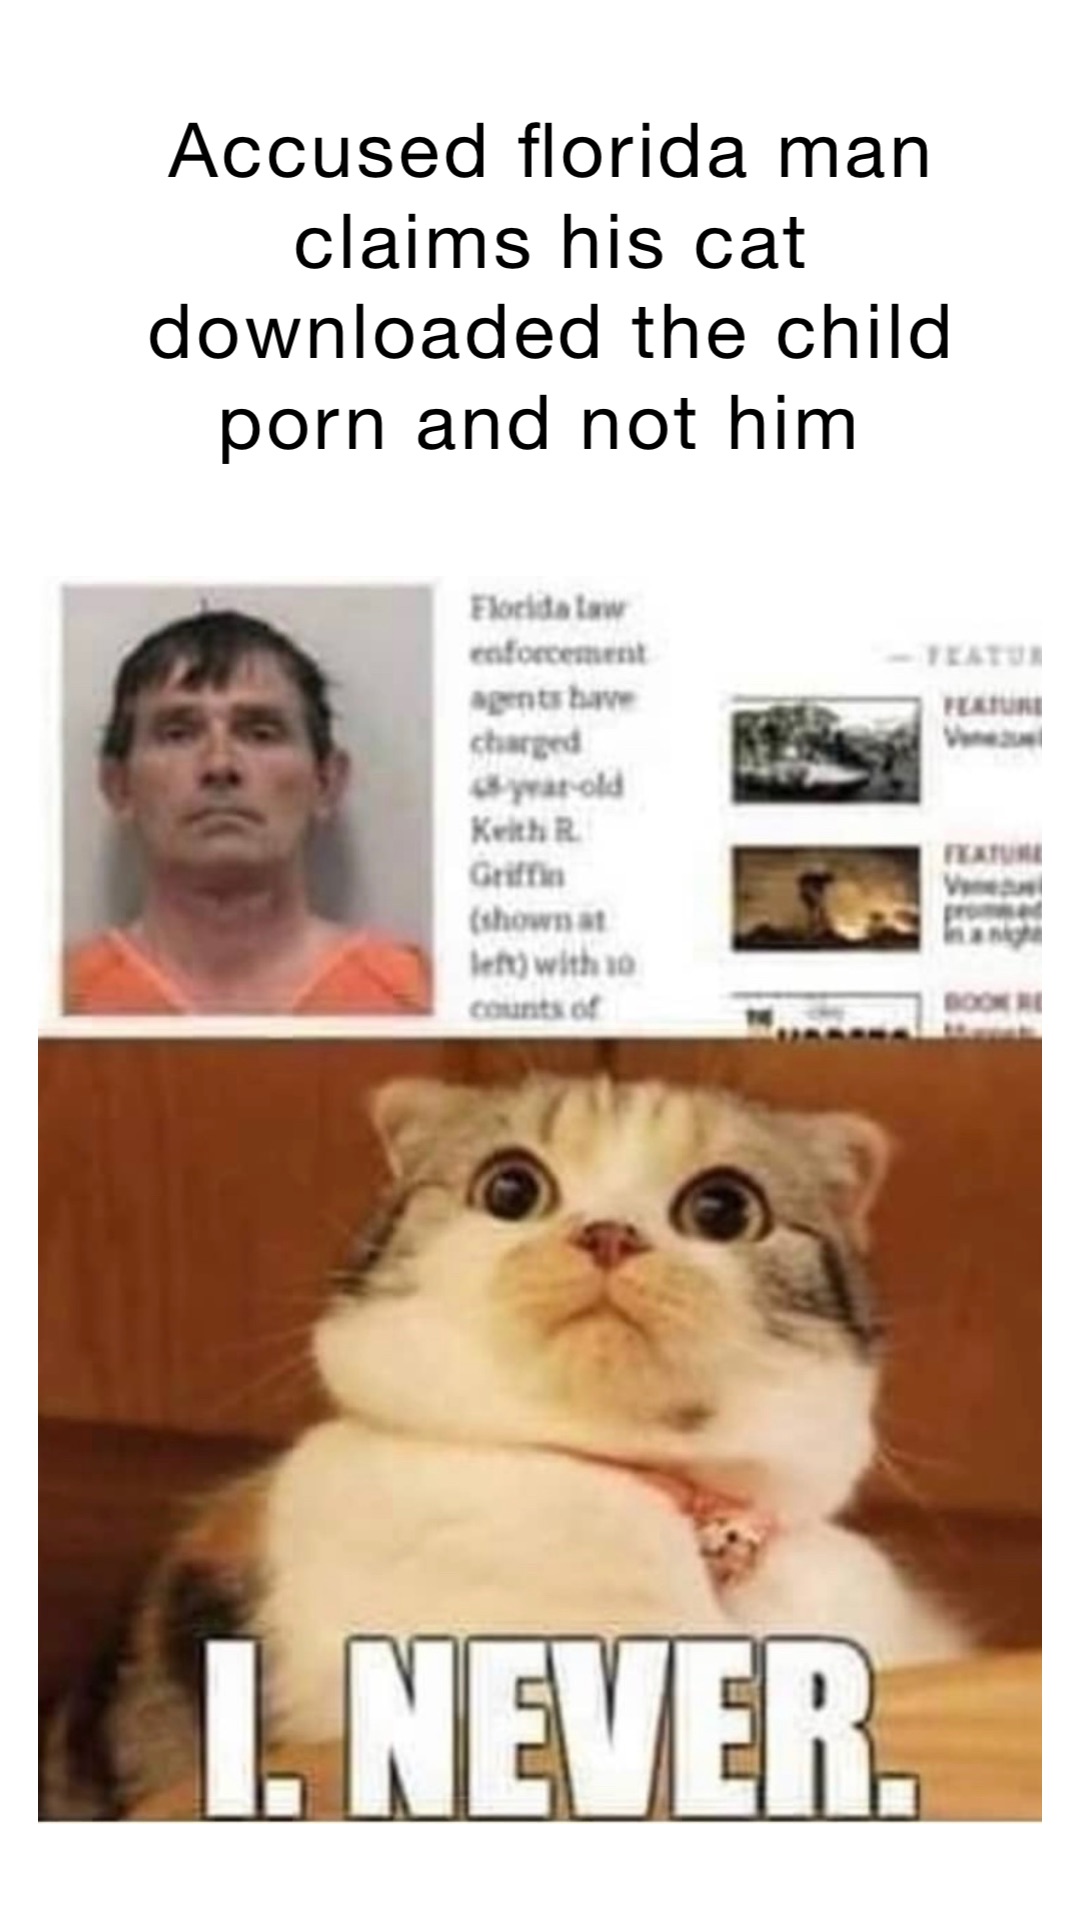 Accused Florida man claims his cat downloaded the child porn and not him